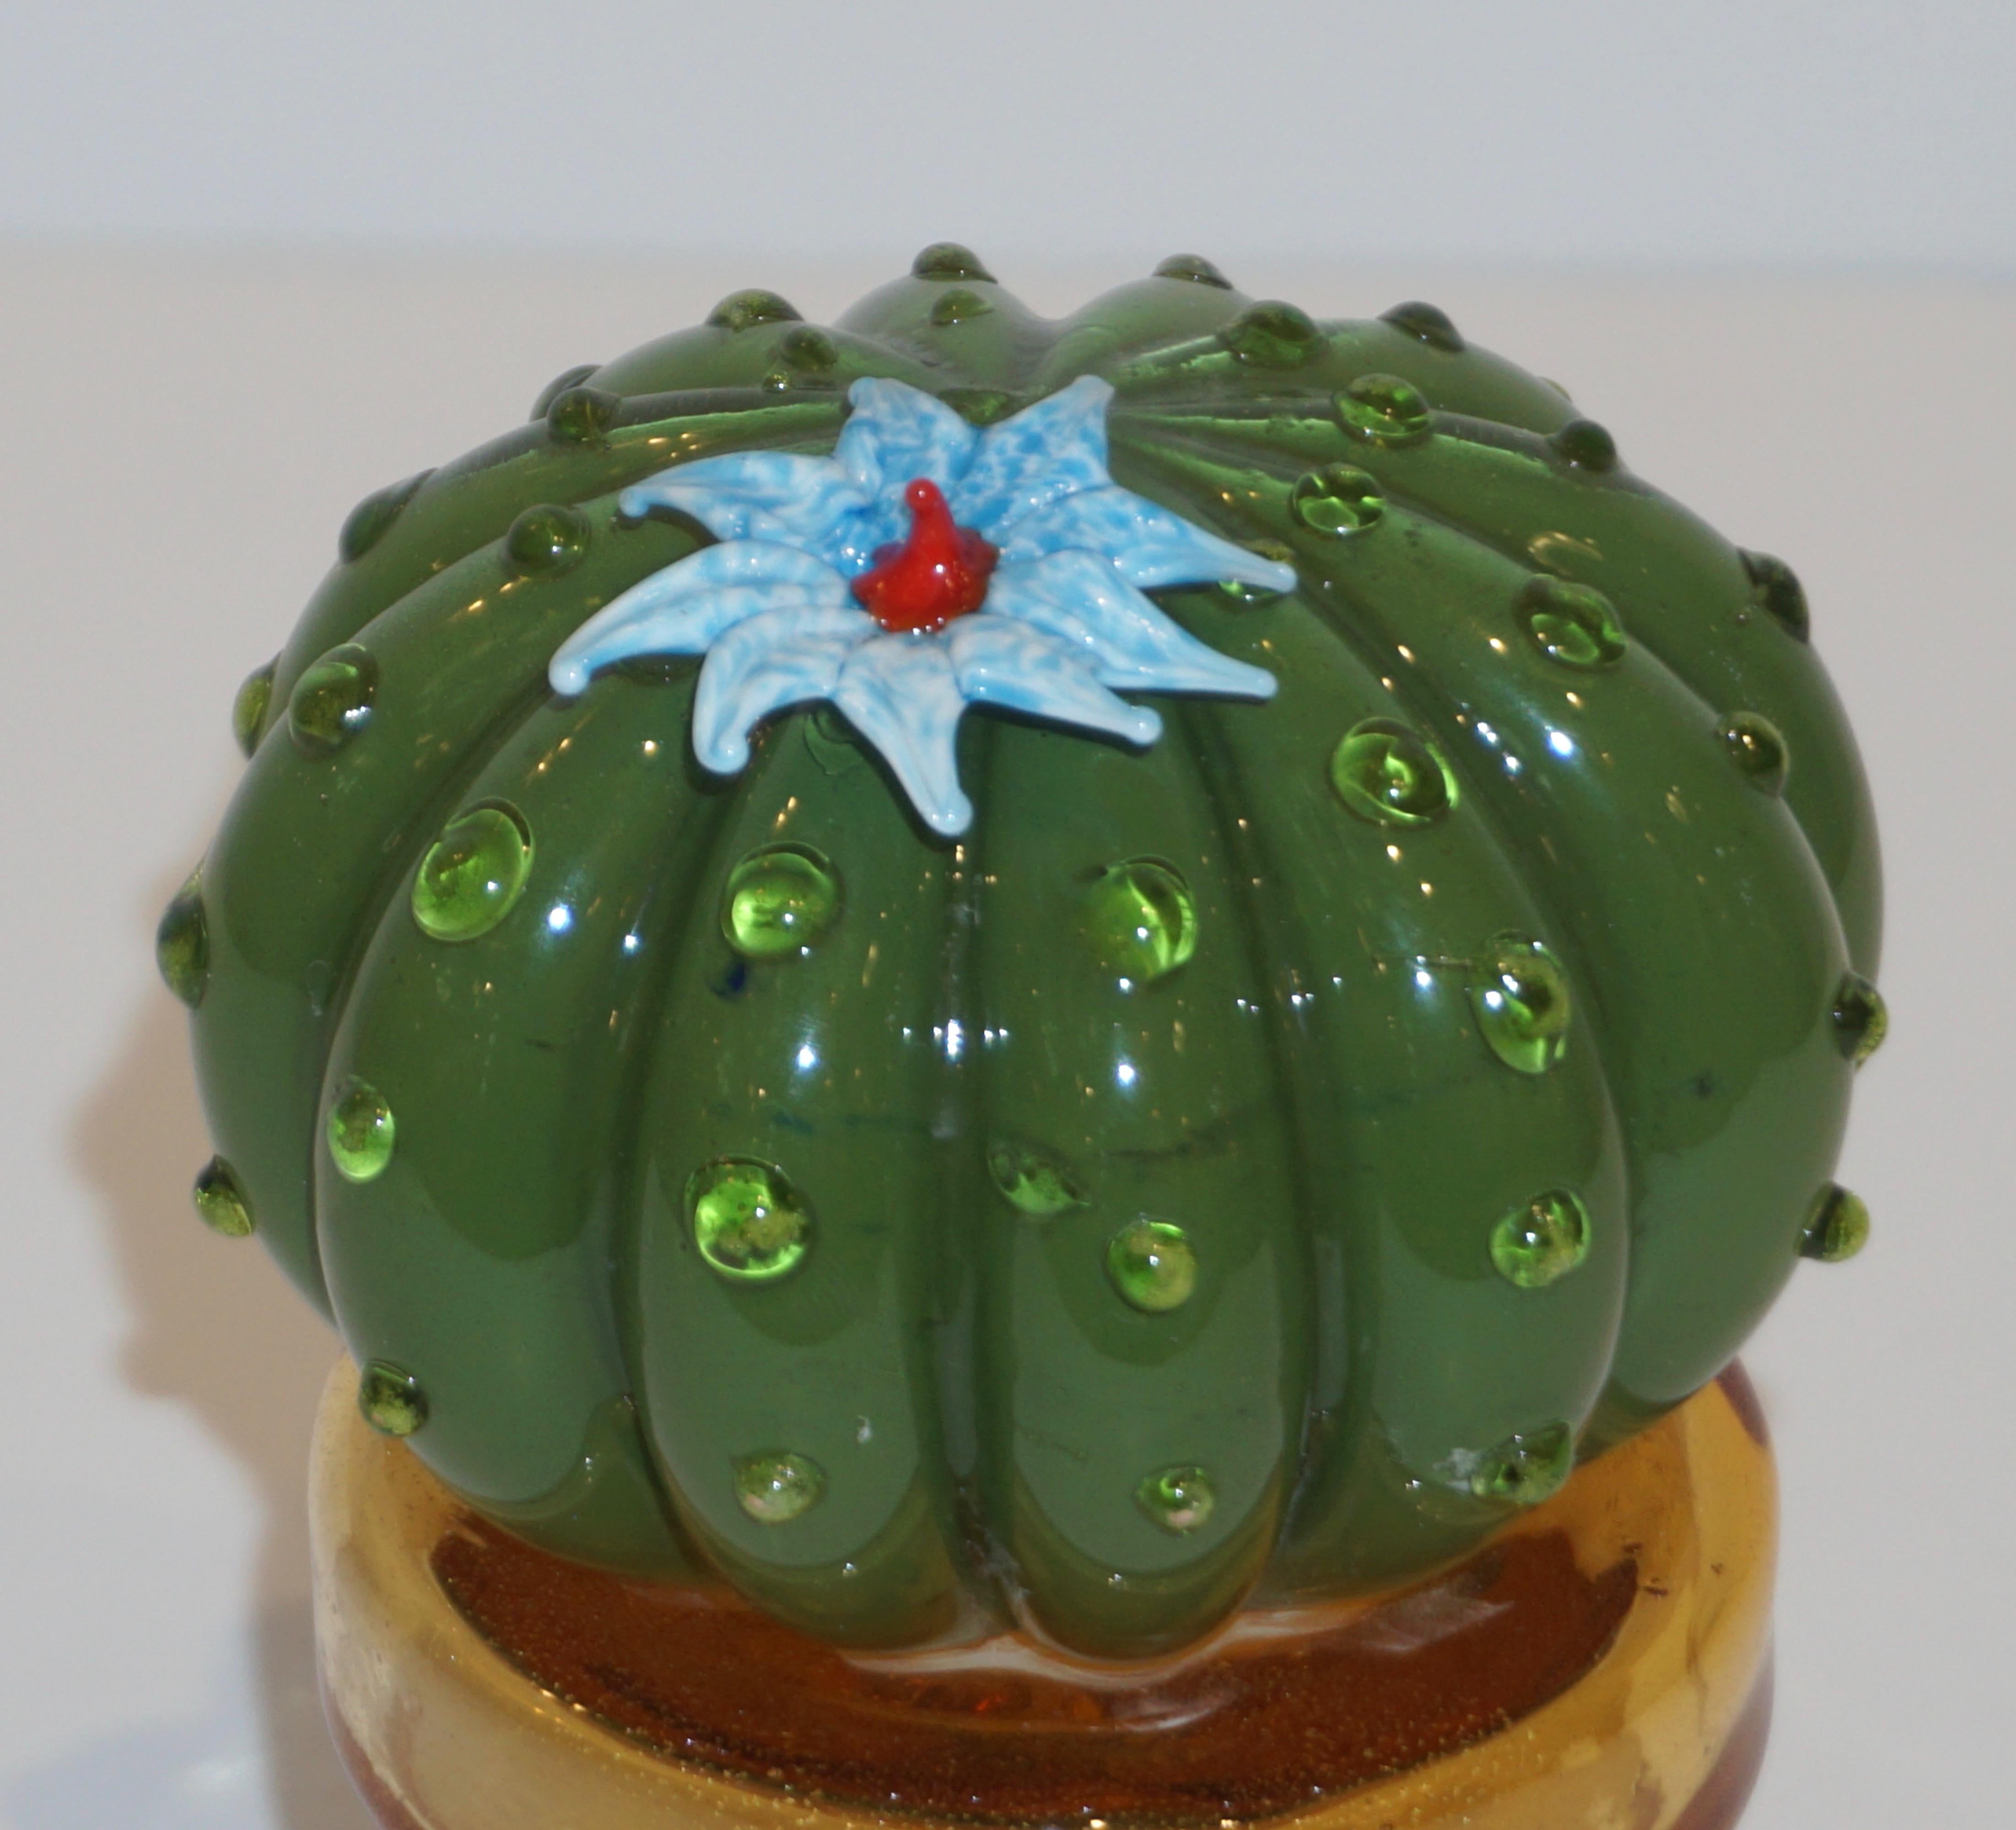 1990 Italian highly collectible glass cactus of limited edition, entirely handcrafted in Murano, with modern Minimalist design blown by Formia, in a lifelike organic modernist shape in overlaid moss green Murano glass highlighted with prickles in